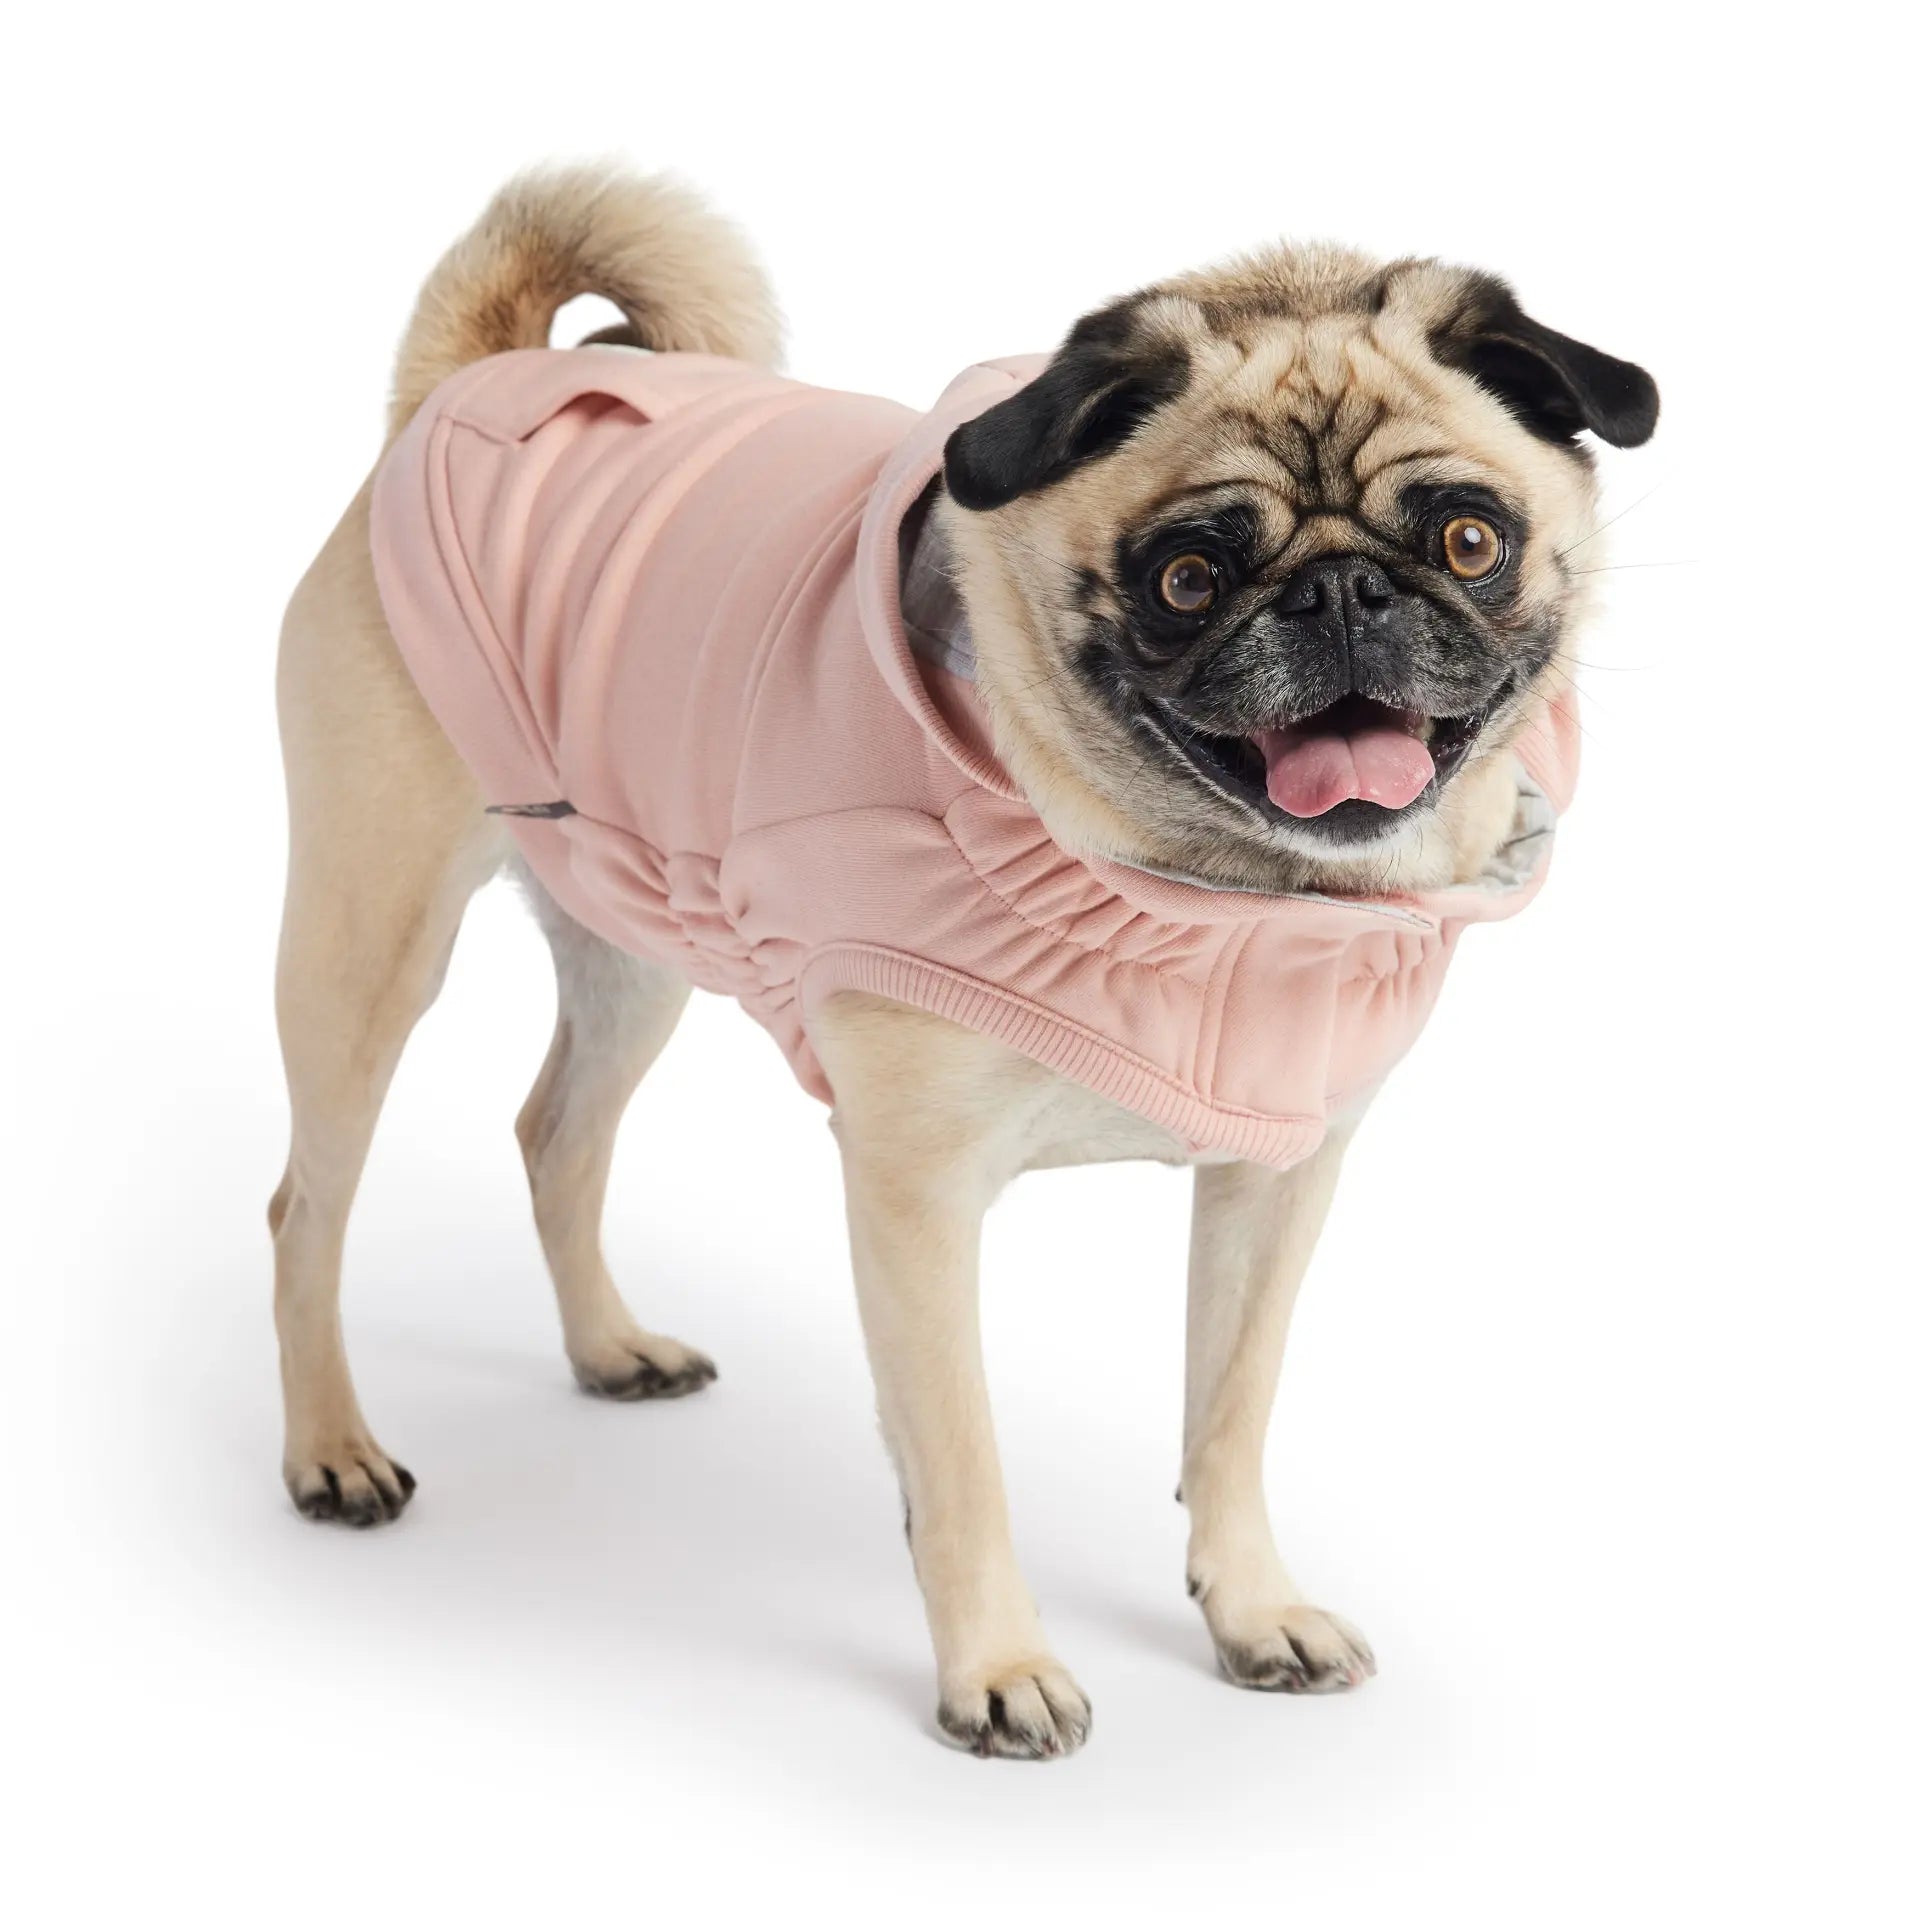 Elasto-Fit Urban Pink Hoodie available at Adorable Pet Supply.